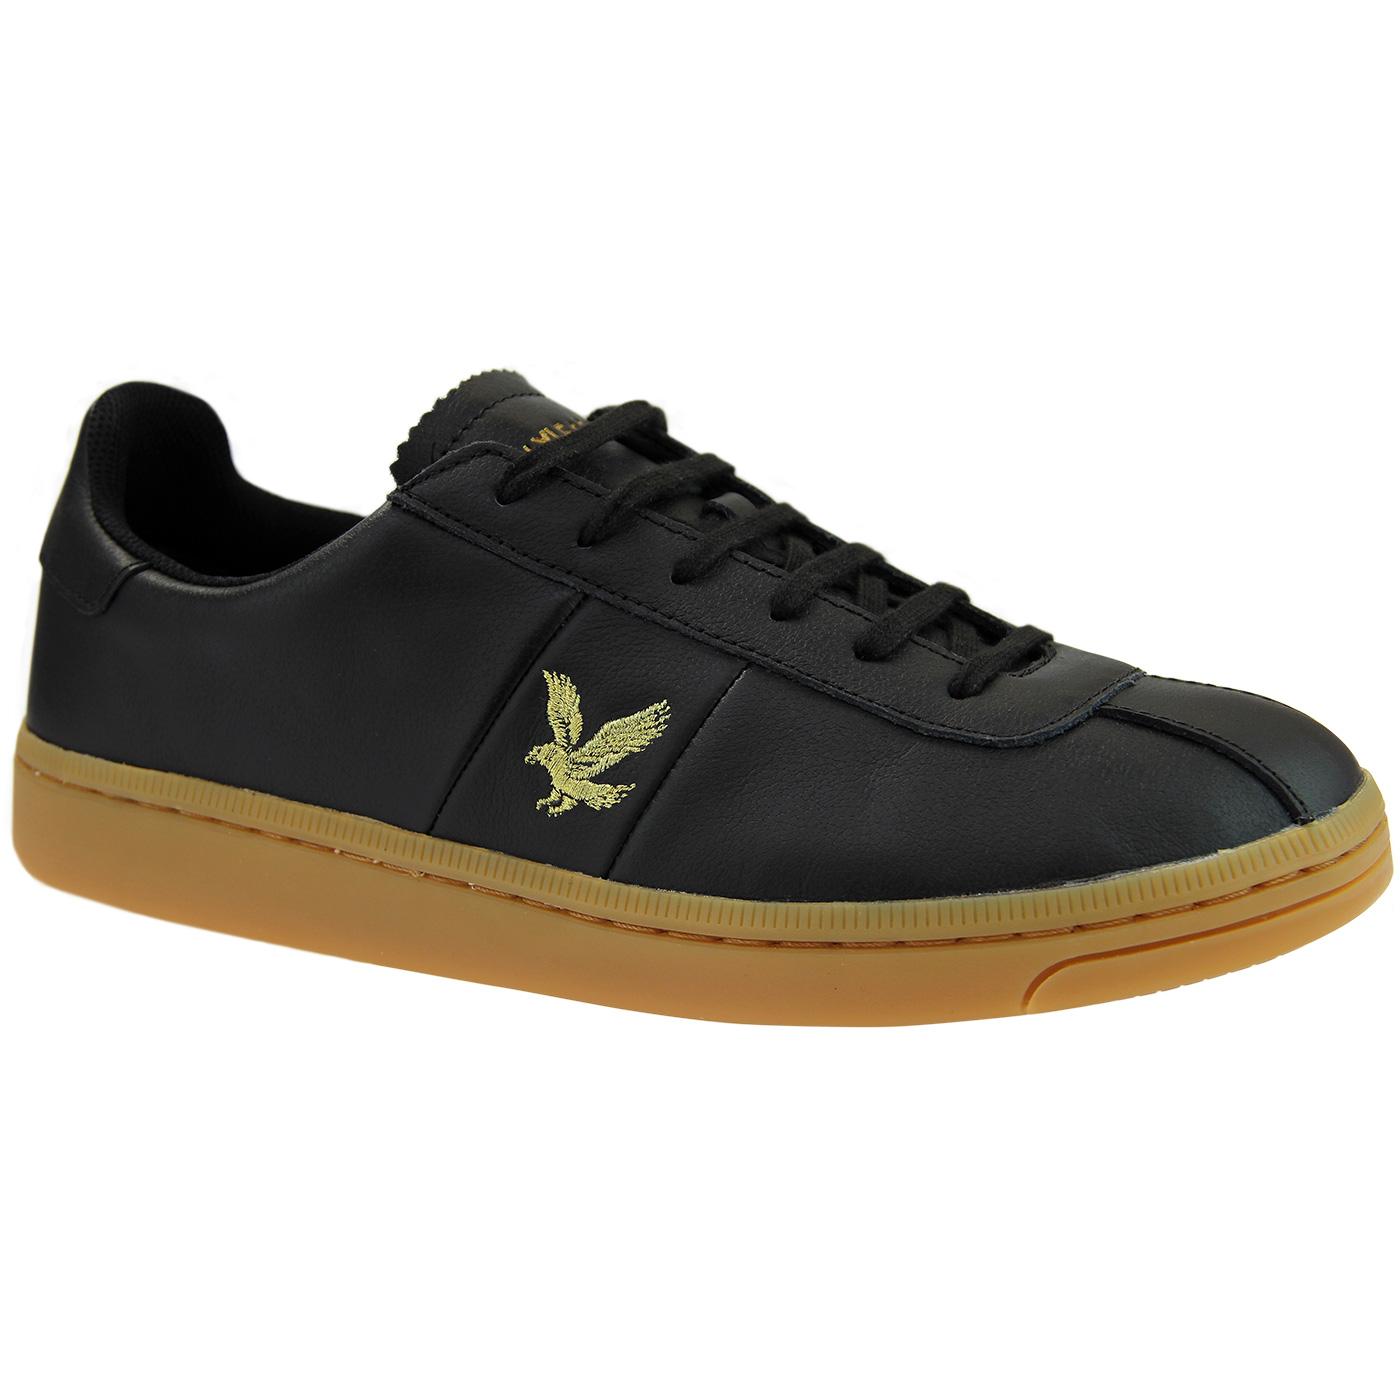 SCOTT Campbell Men's Black Leather Trainers